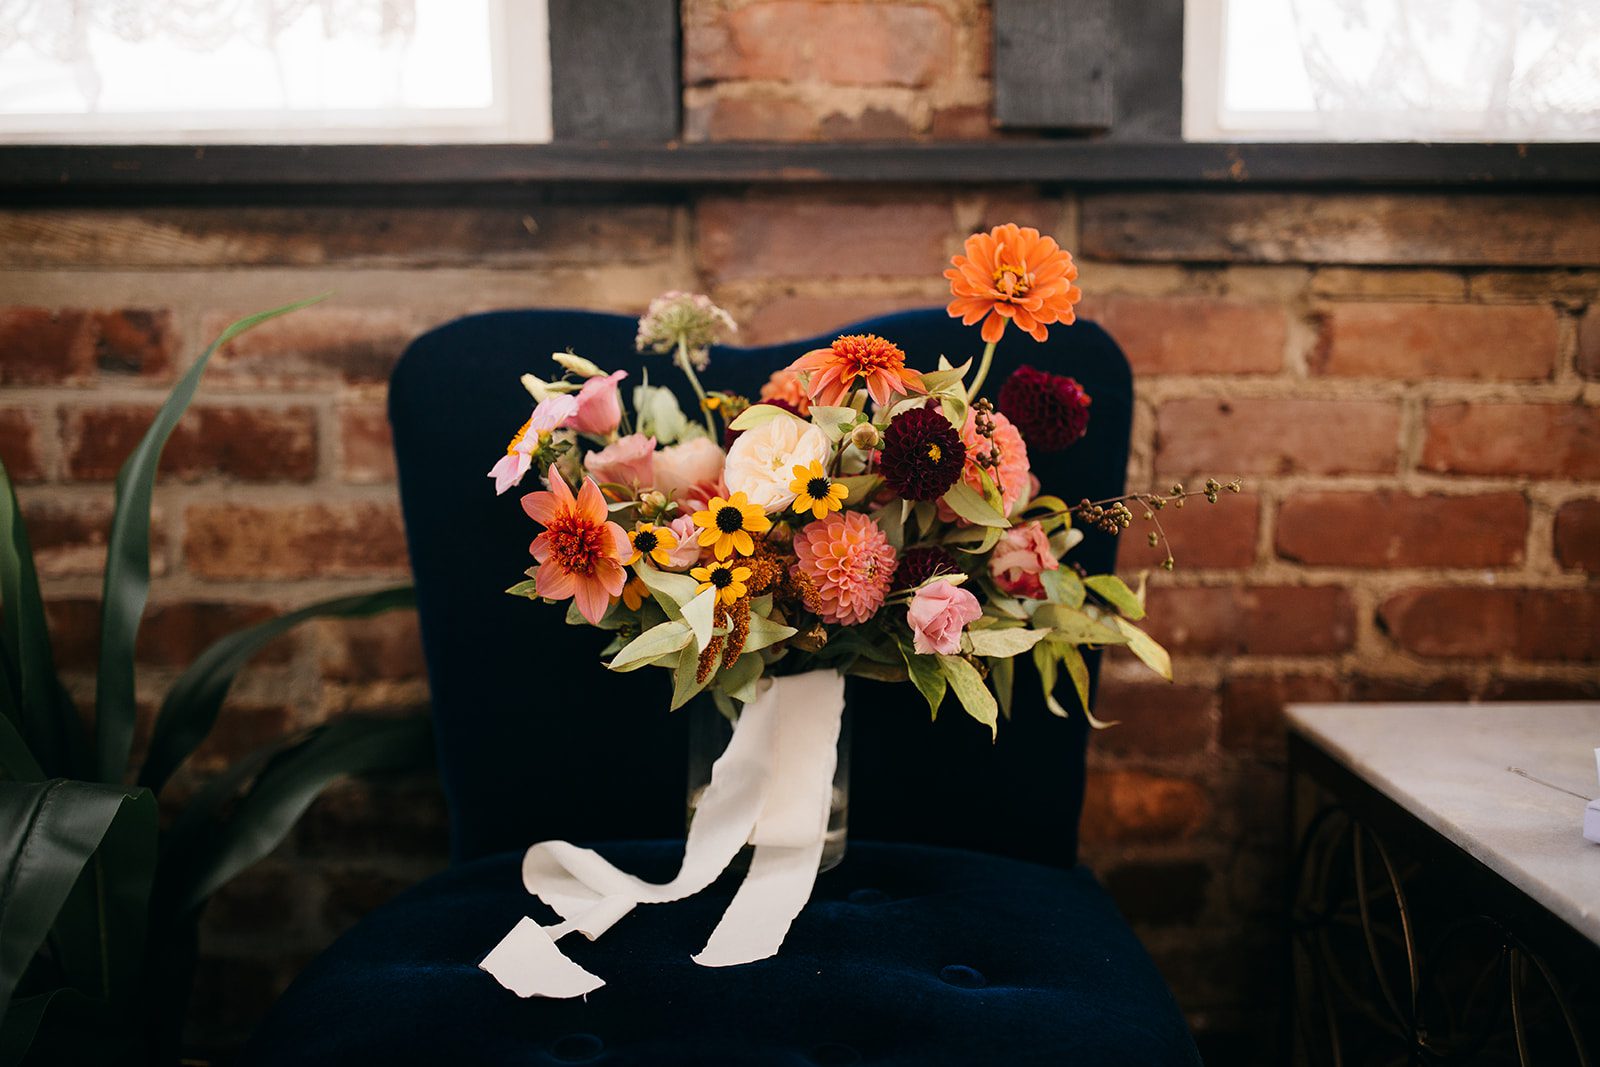 Wedding planning resources showcasing colorful flowers sitting in a dark navy chair with a brick wall background.